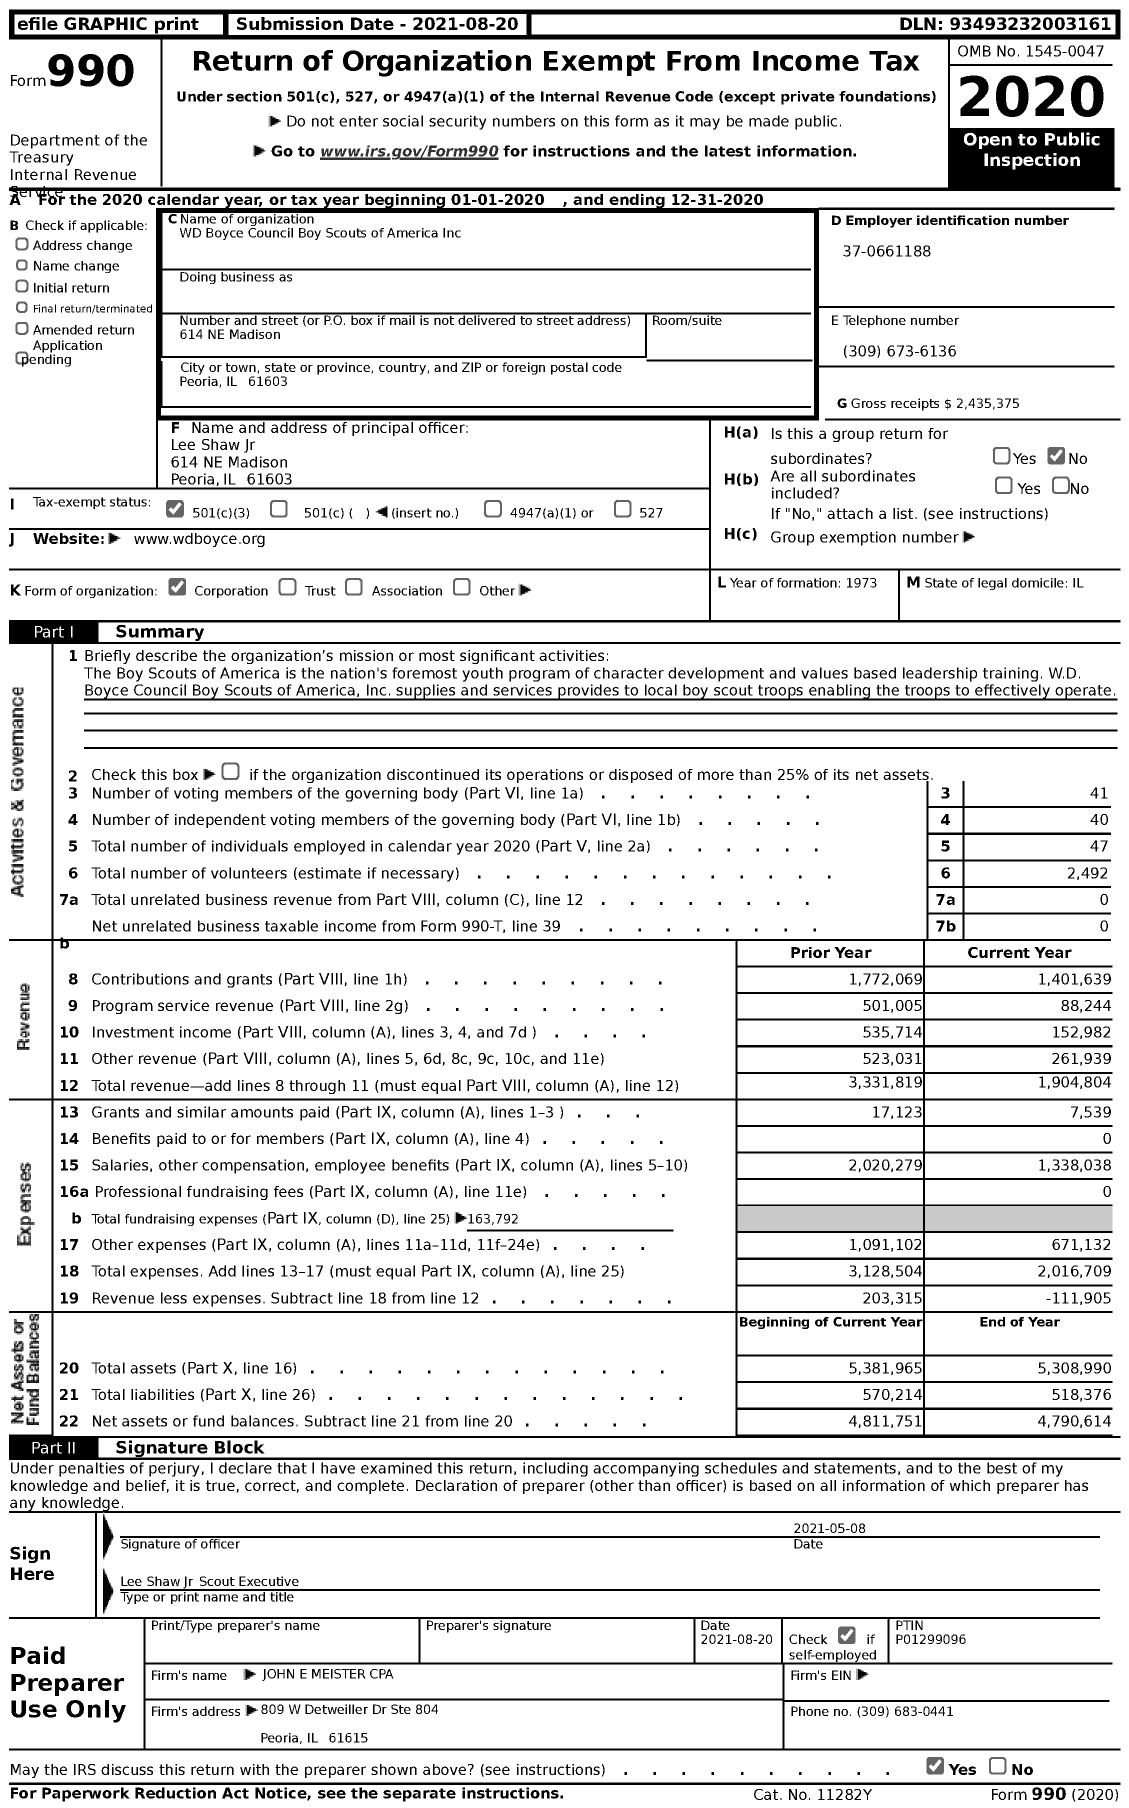 Image of first page of 2020 Form 990 for Boy Scouts of America - 138 W D Boyce Council